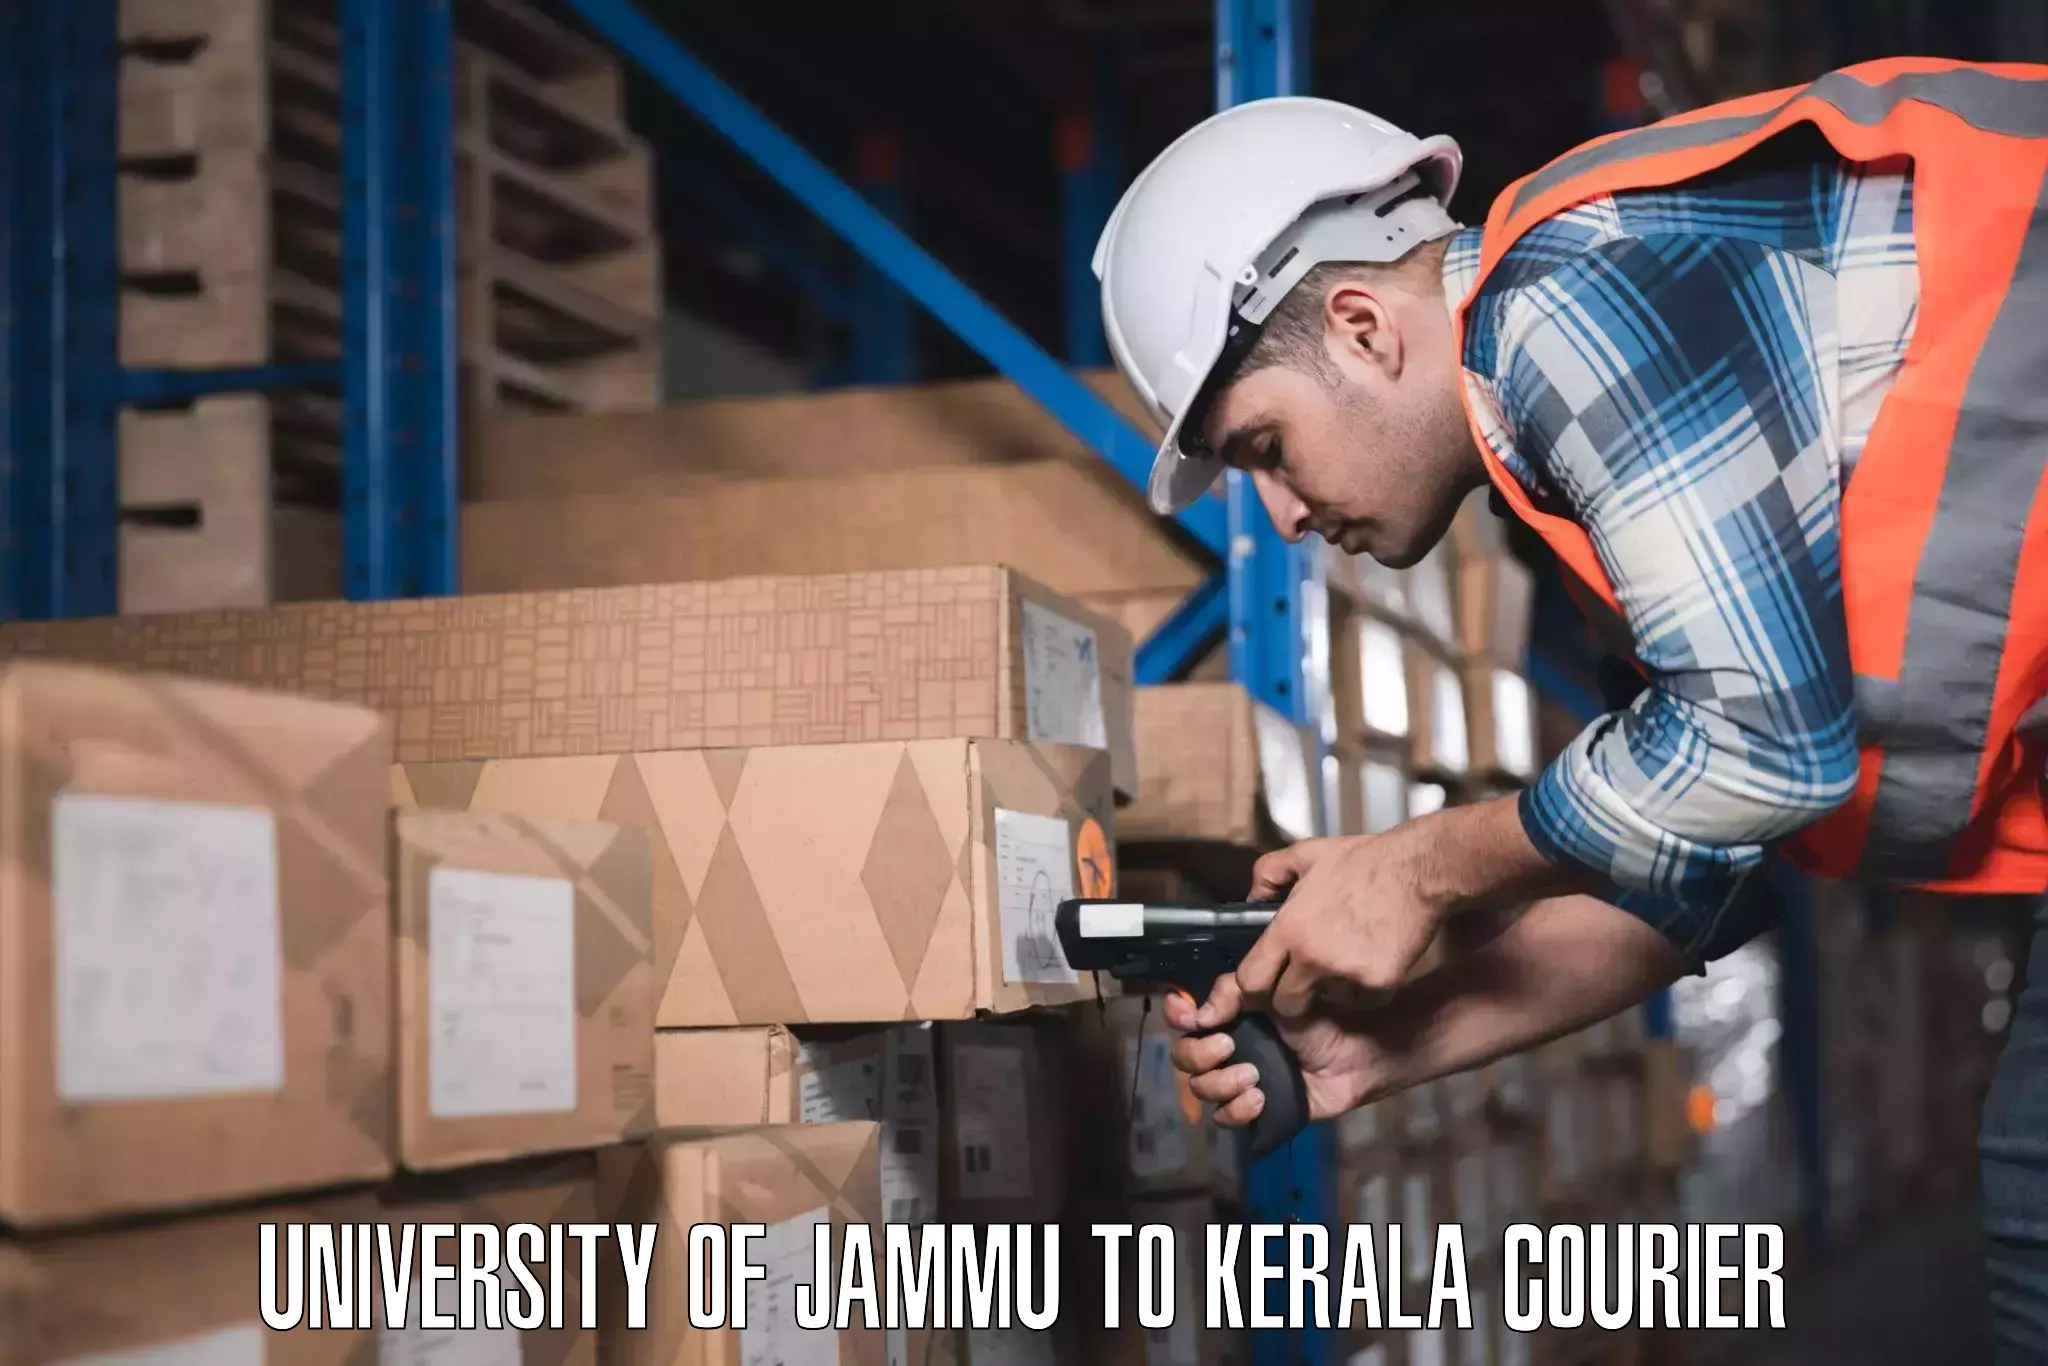 Luggage shipping service University of Jammu to Cochin University of Science and Technology